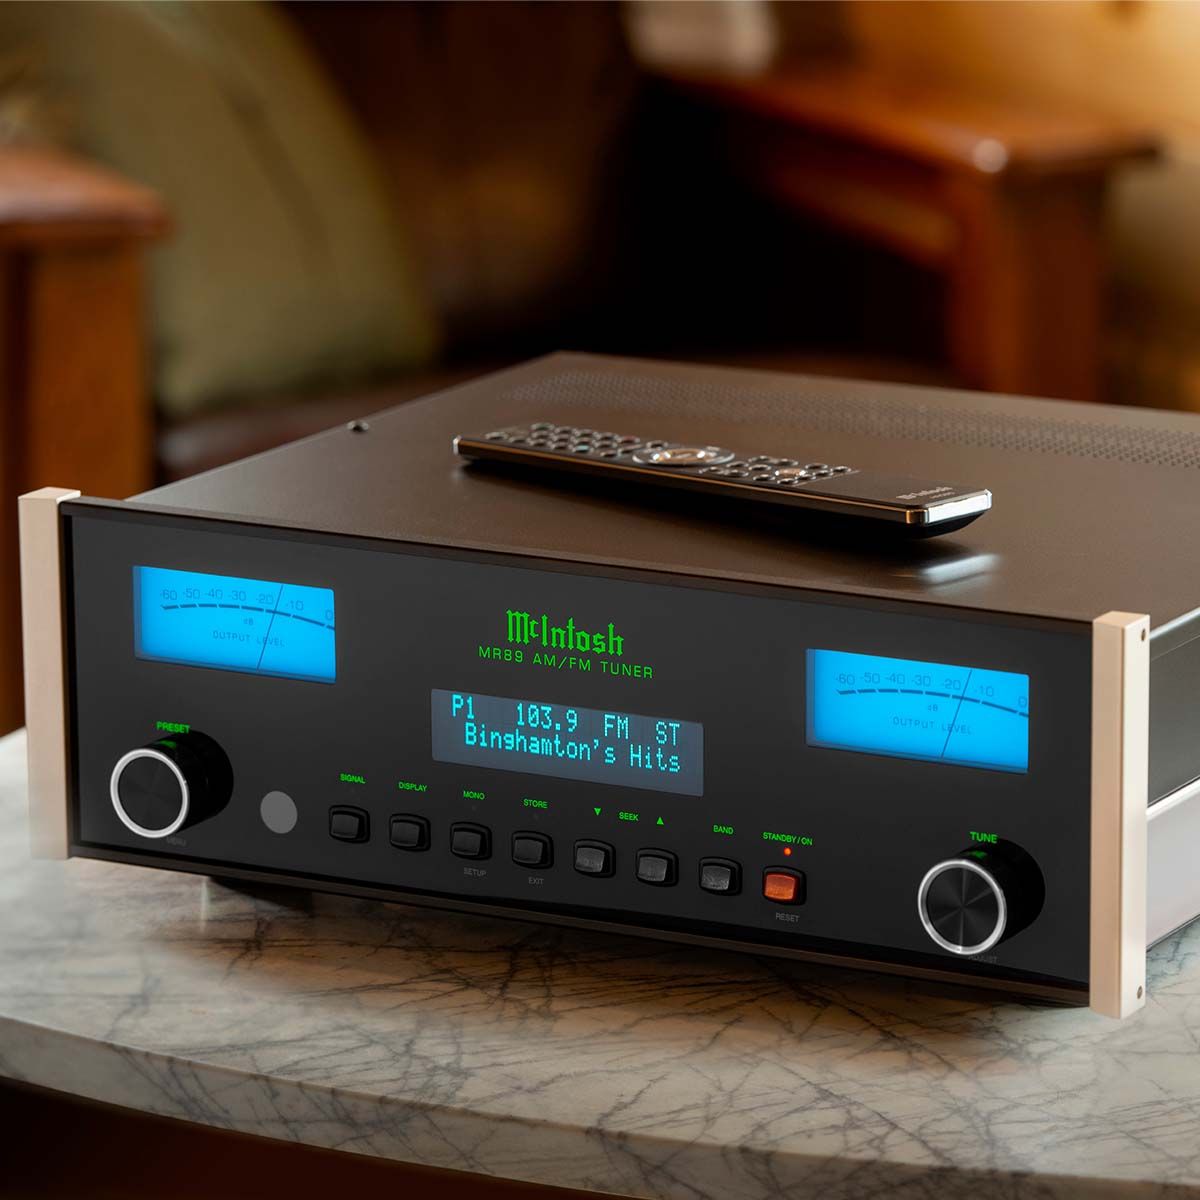 McIntosh MR89 AM/FM Tuner - on table with remote control